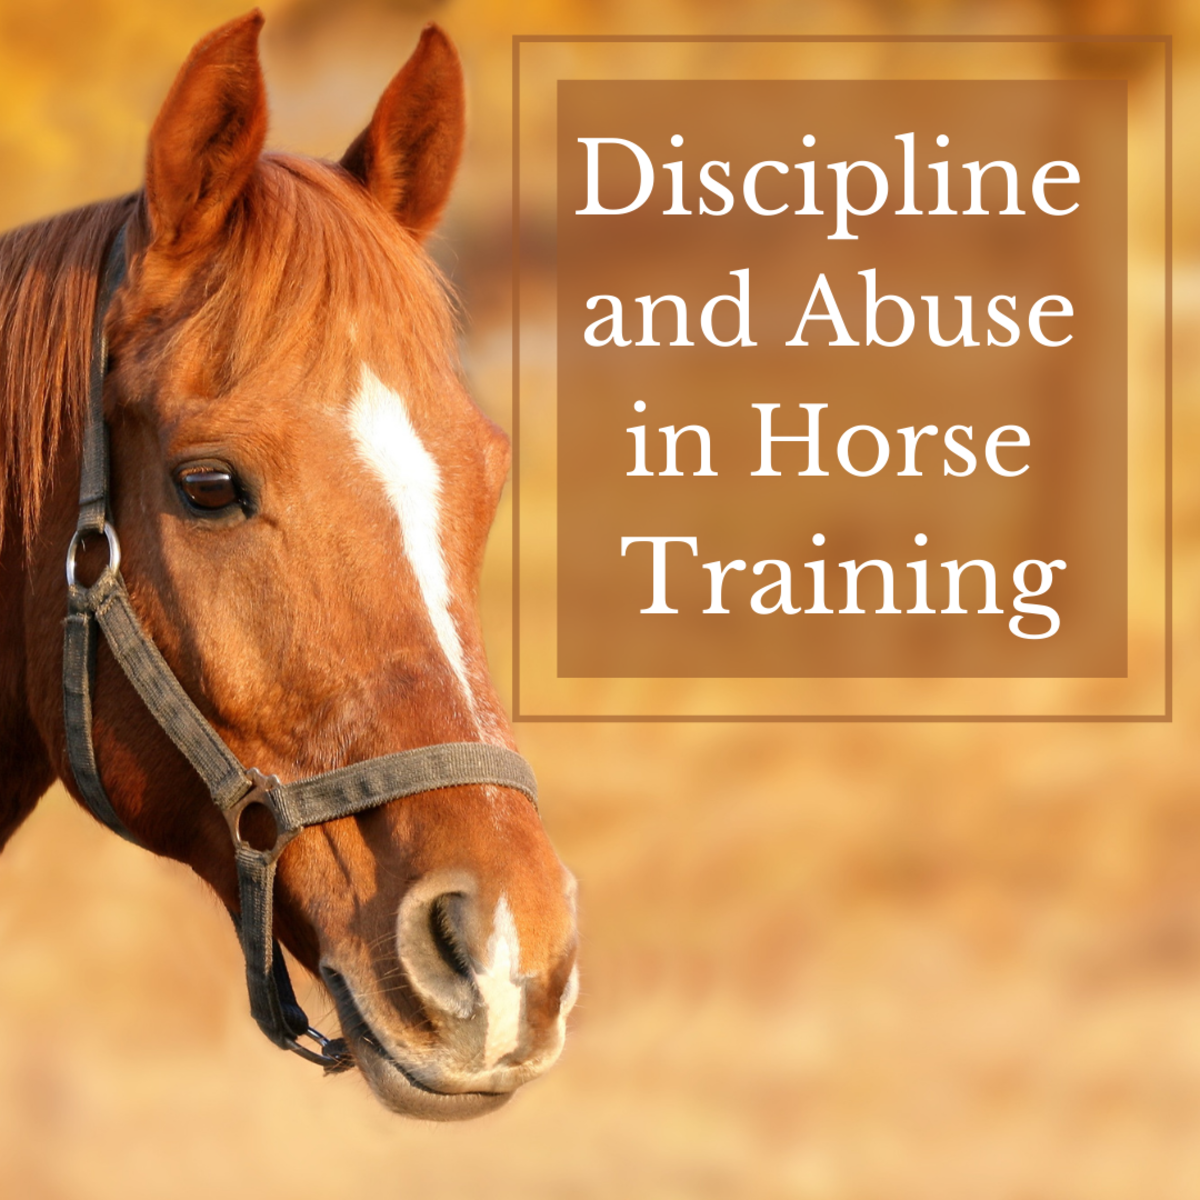 Horse Training: When Is Discipline Abuse?